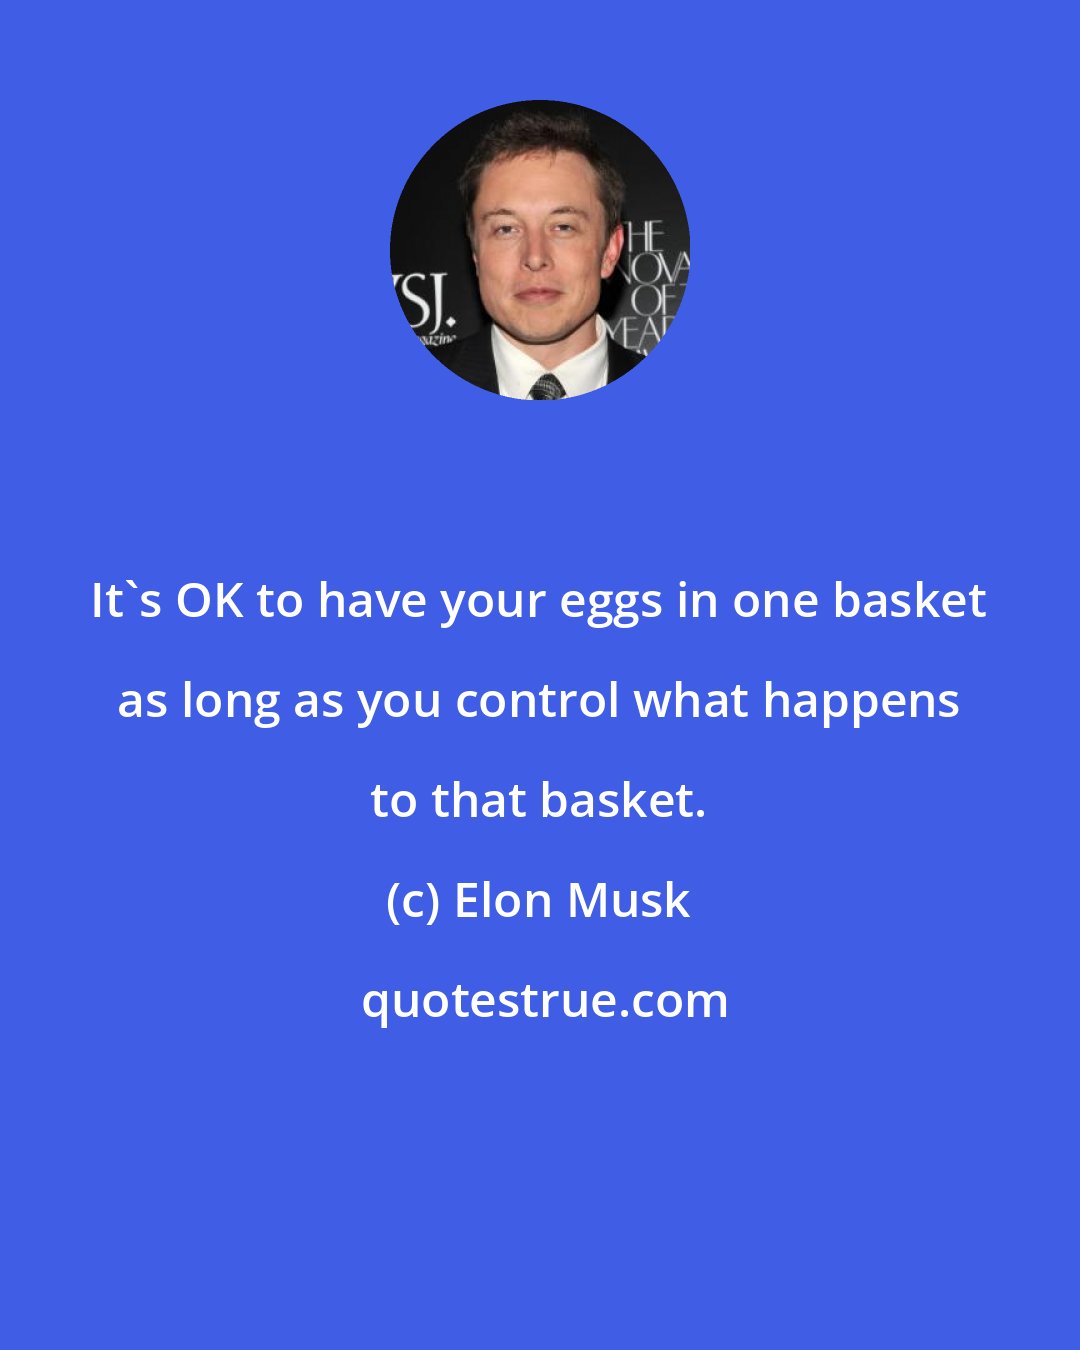 Elon Musk: It's OK to have your eggs in one basket as long as you control what happens to that basket.